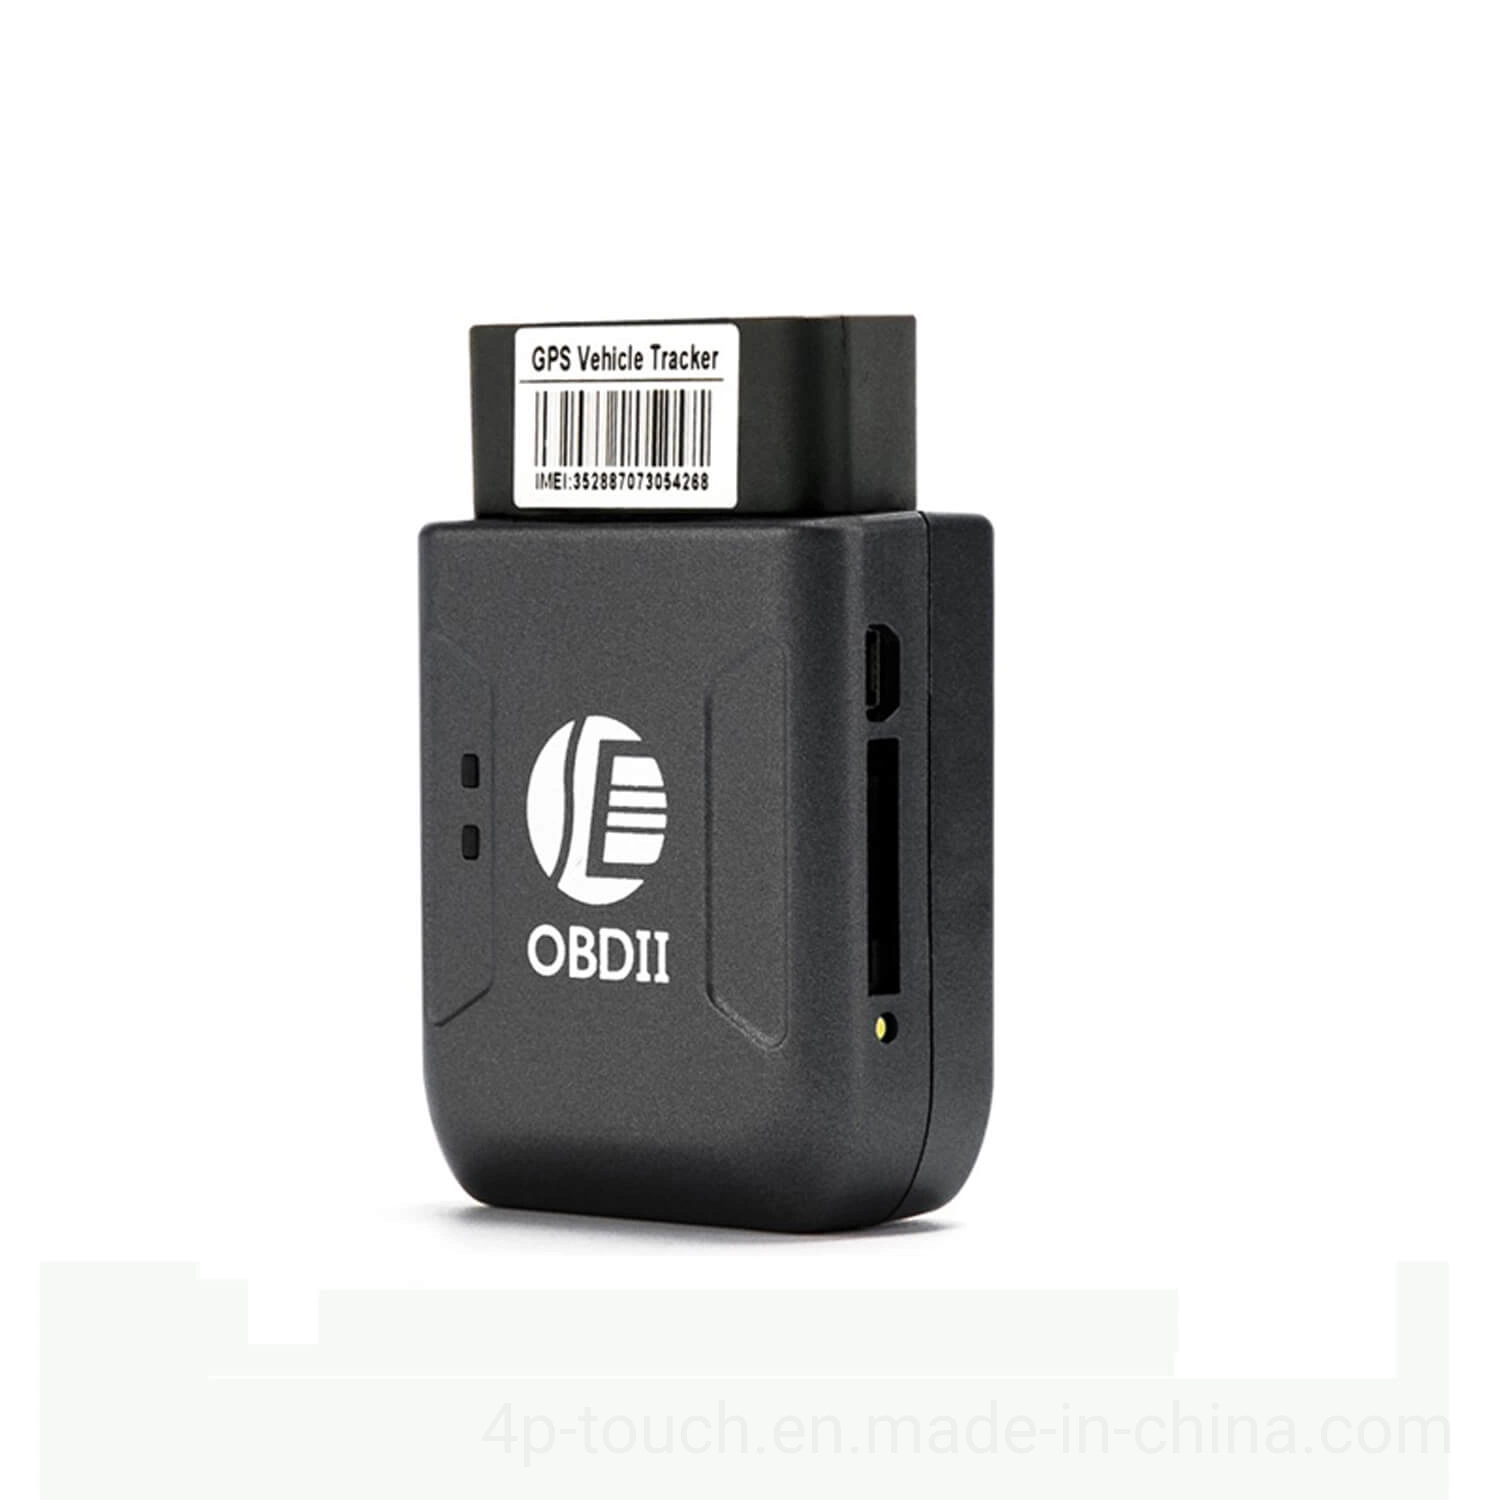 Newest Original Factory Anti Theft OBDII Bluetooth GSM GPS Vehicle Tracker for Car Motorcycle with Speeding Alarm T206